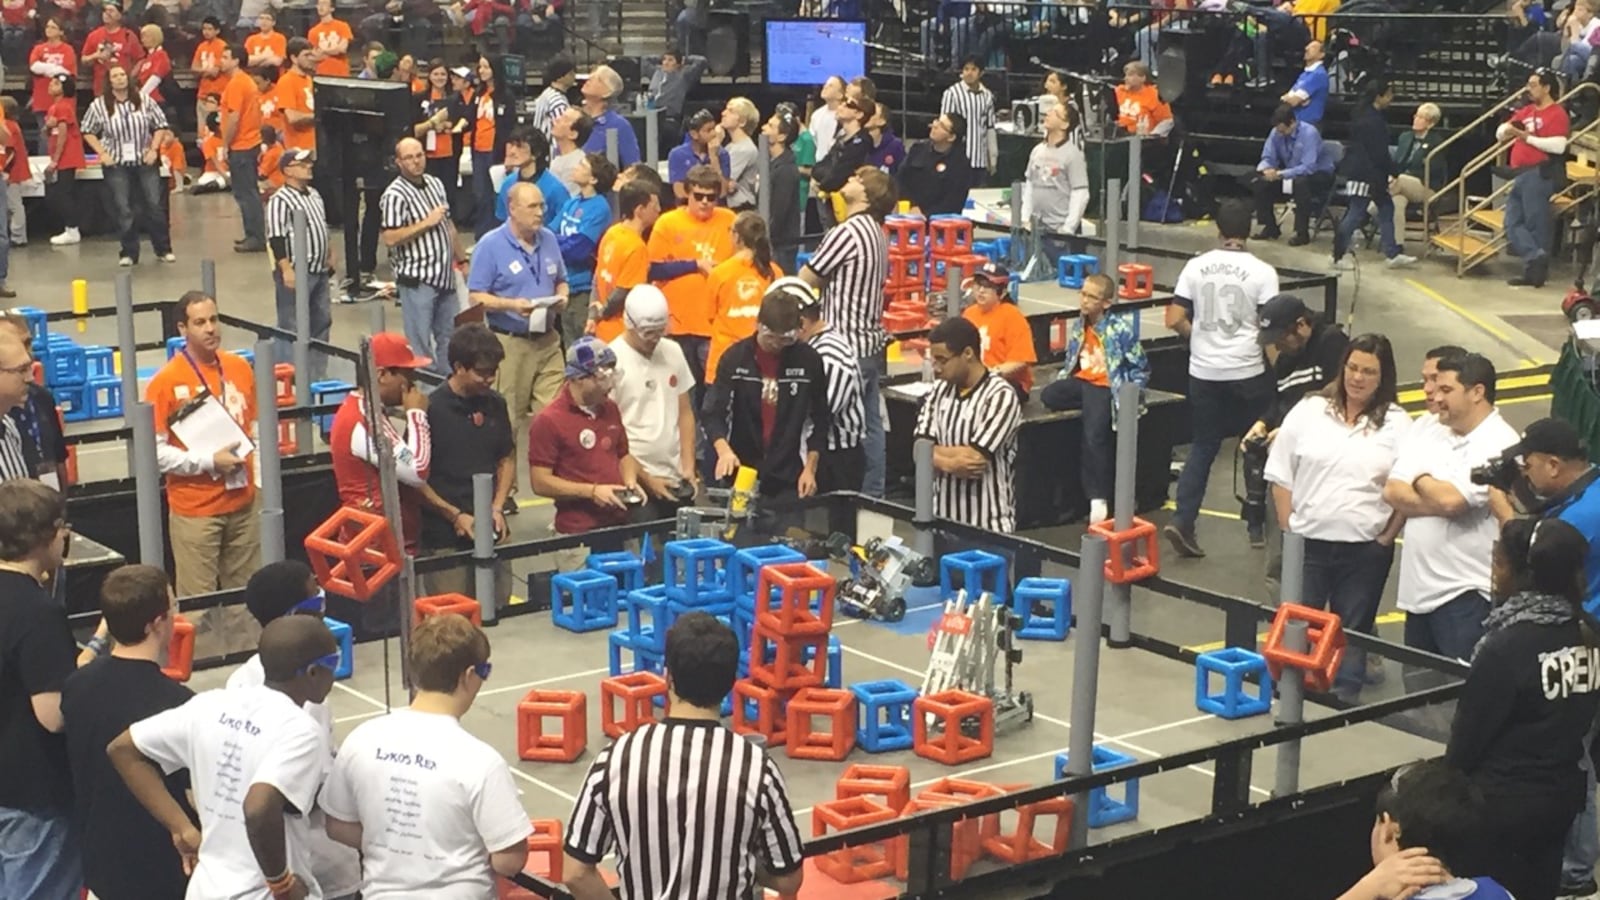 Providence Cristo Rey High School's robotics team competes in the VEX tournament Sunday. The goal of the challenge is to stack cubes on the gray goalposts or build towers in the arena.